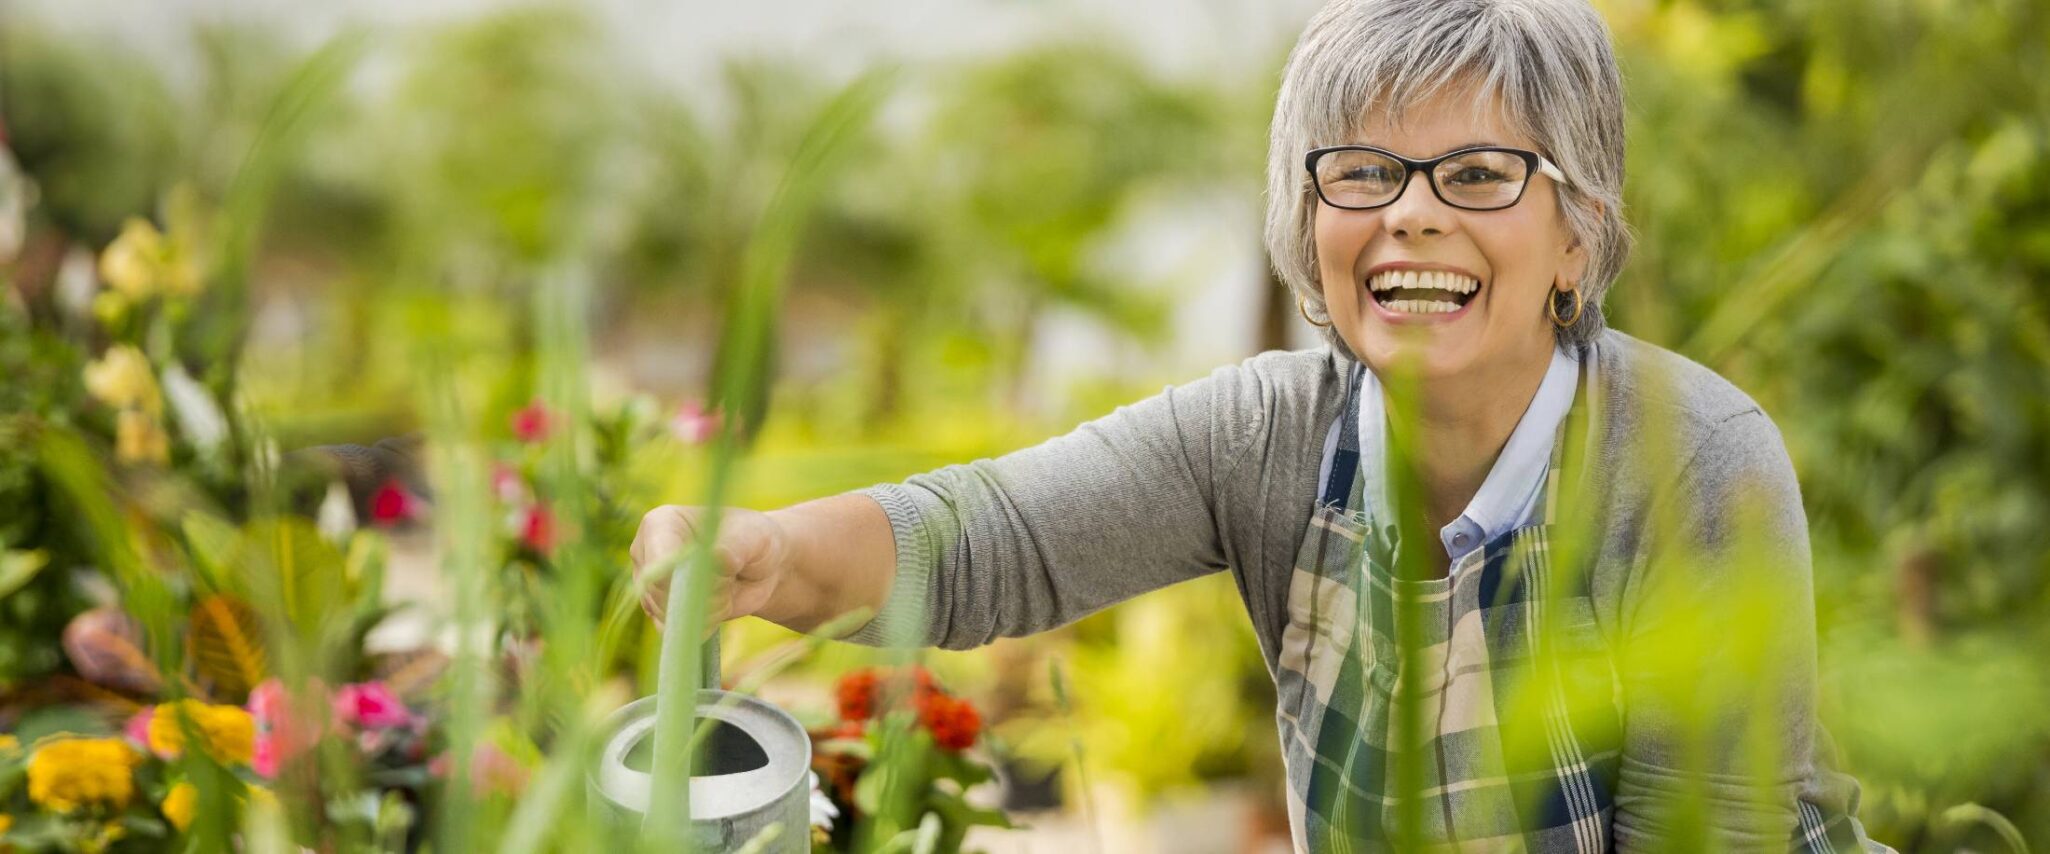 senior watering flowers while smiling at the camera